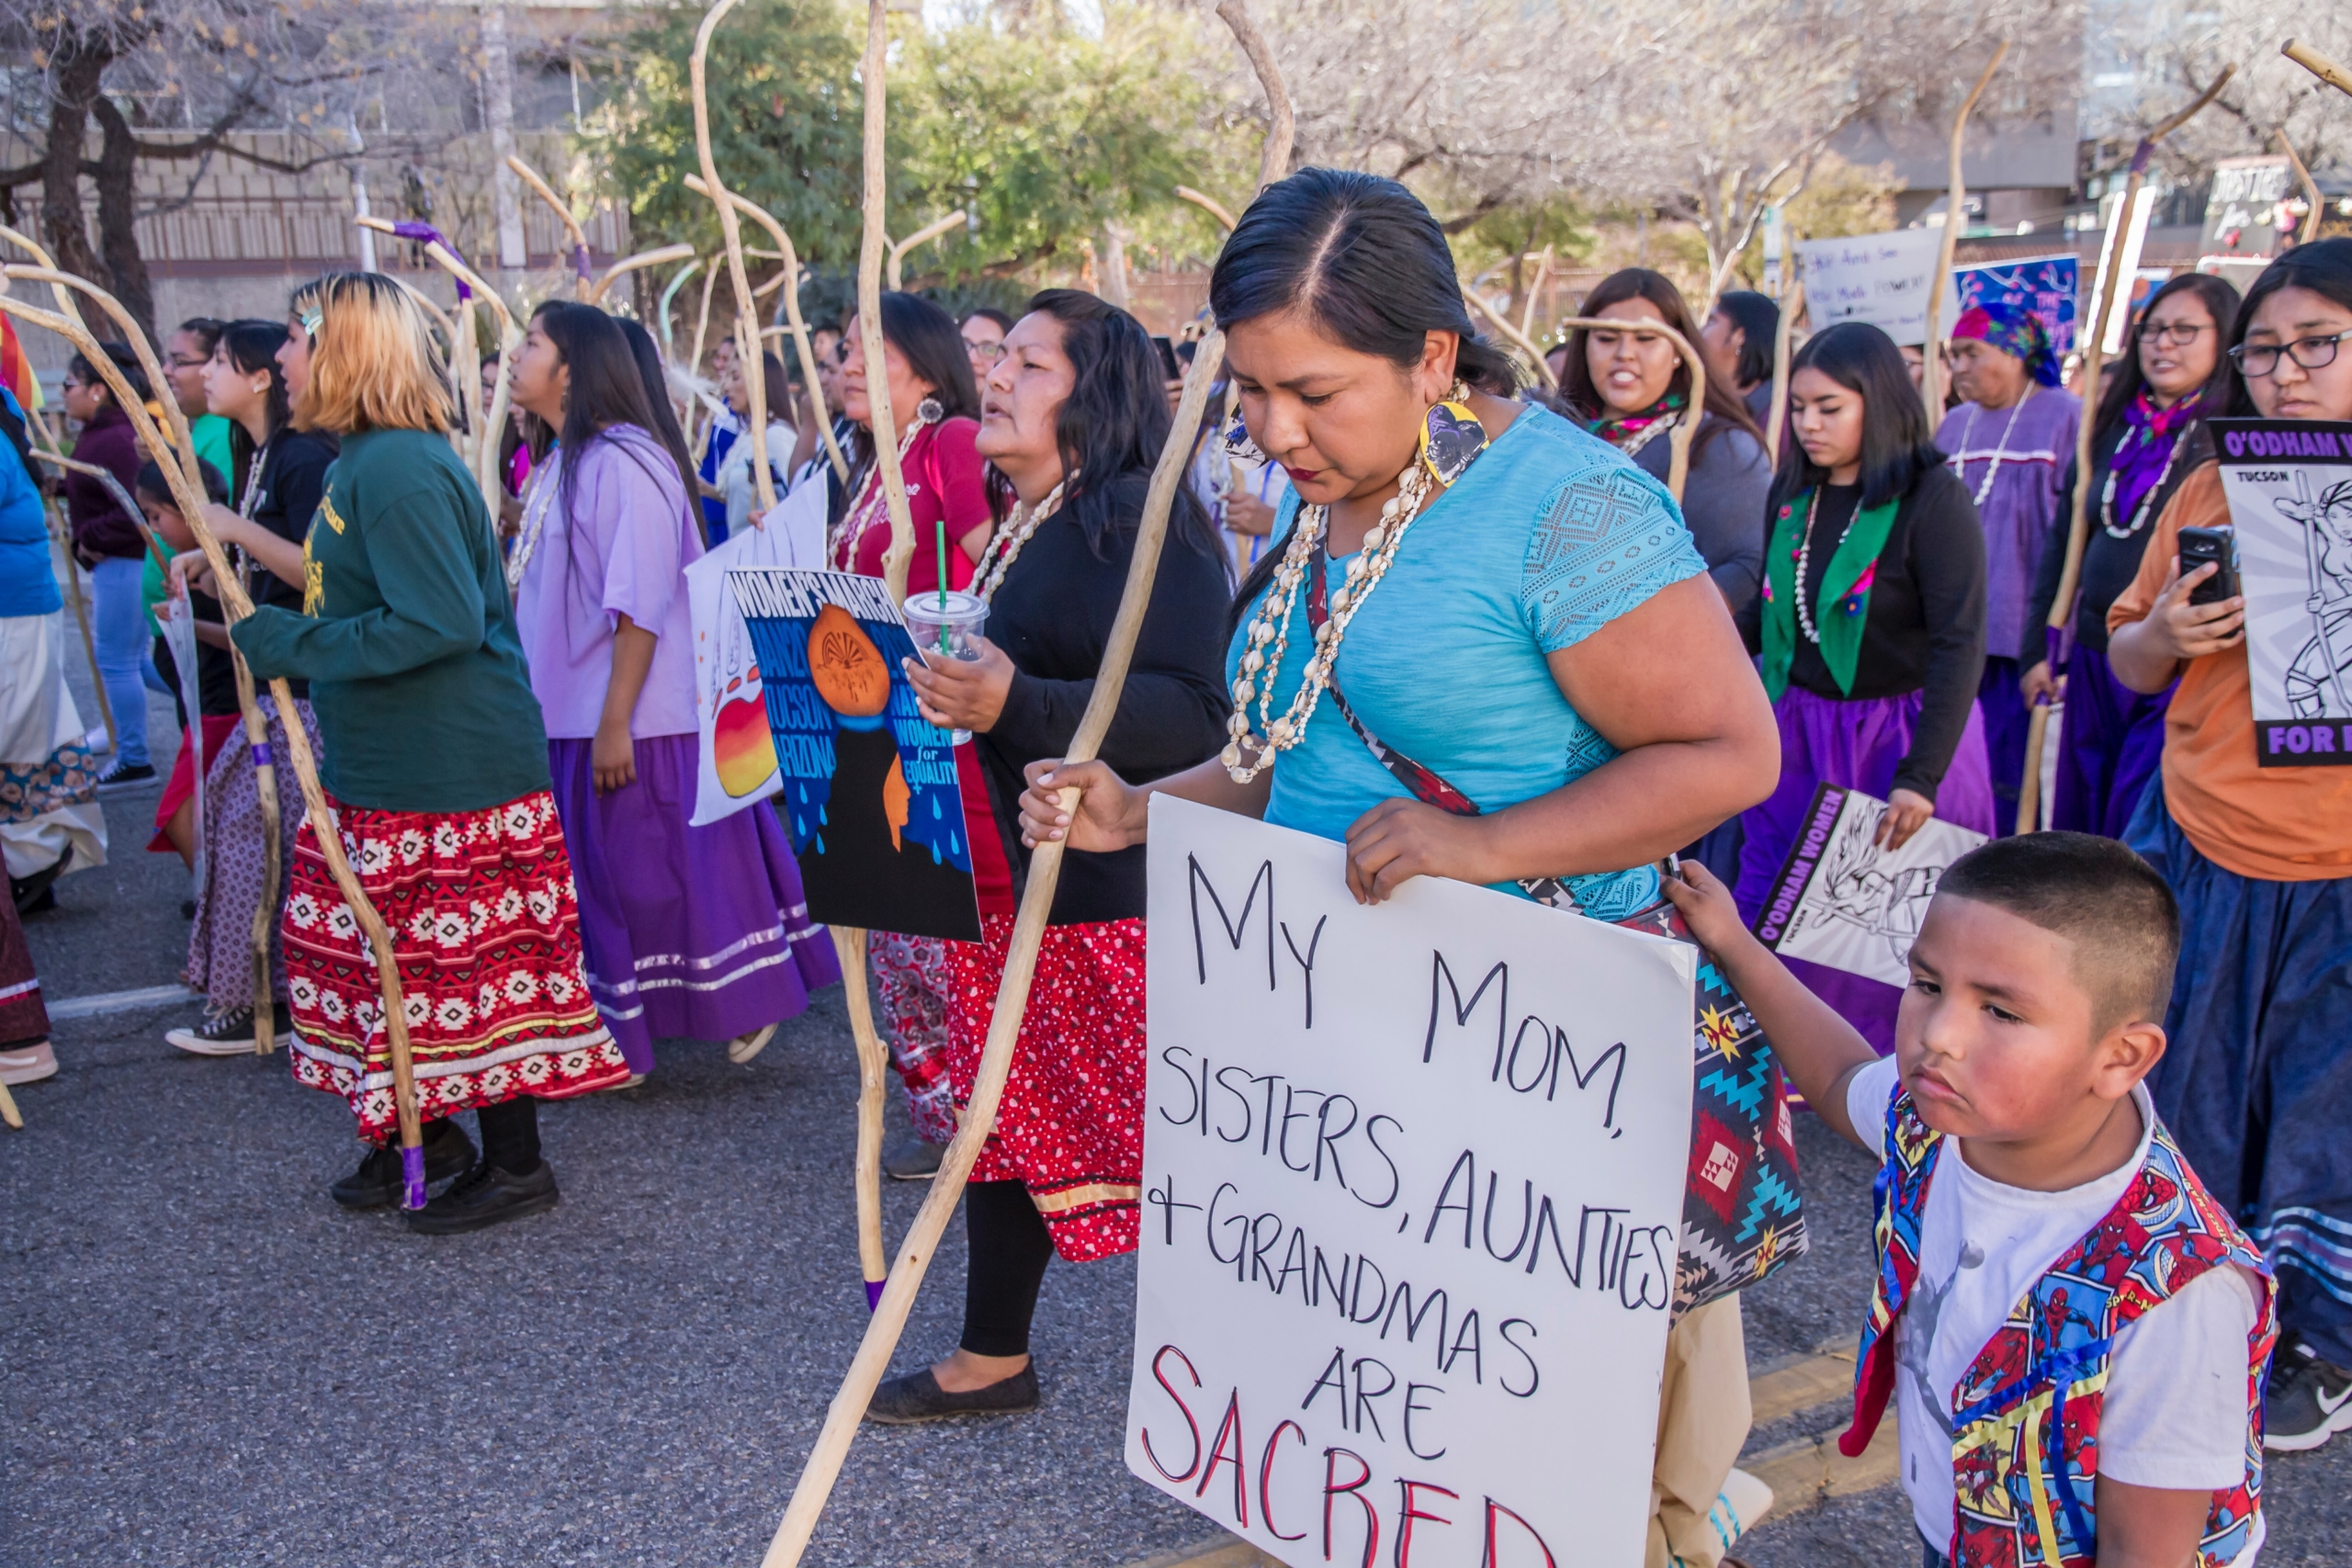 Group of indigenous women and children walking. Person towards front is holding a sign that reads "my mom, sisters, aunties, and grandmas are sacred."